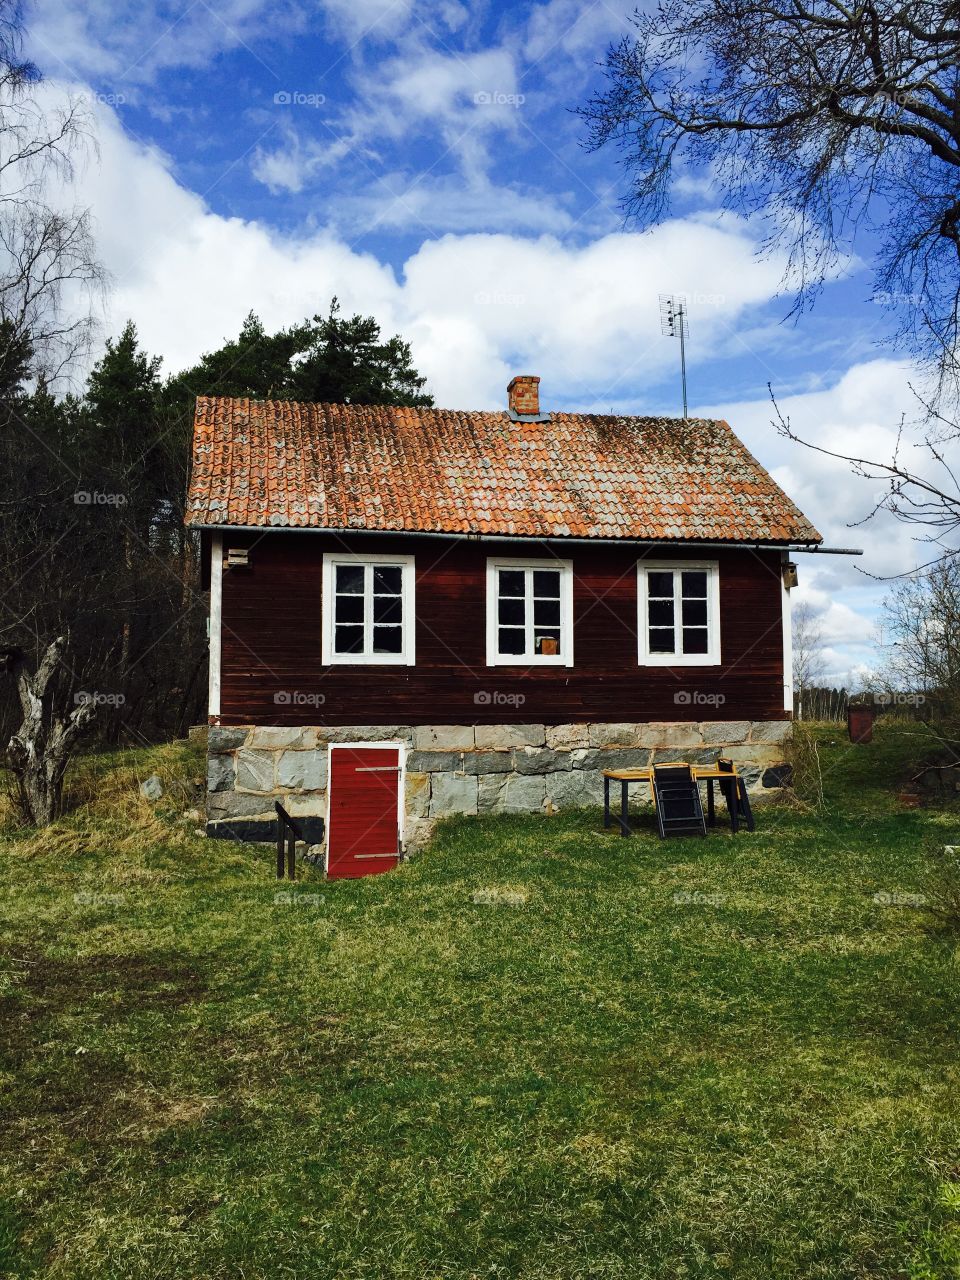 Red house in Sweden. This is where I spent my summers as a kid. Slöjdstugan, where my great grandfather made violins and other instruments.